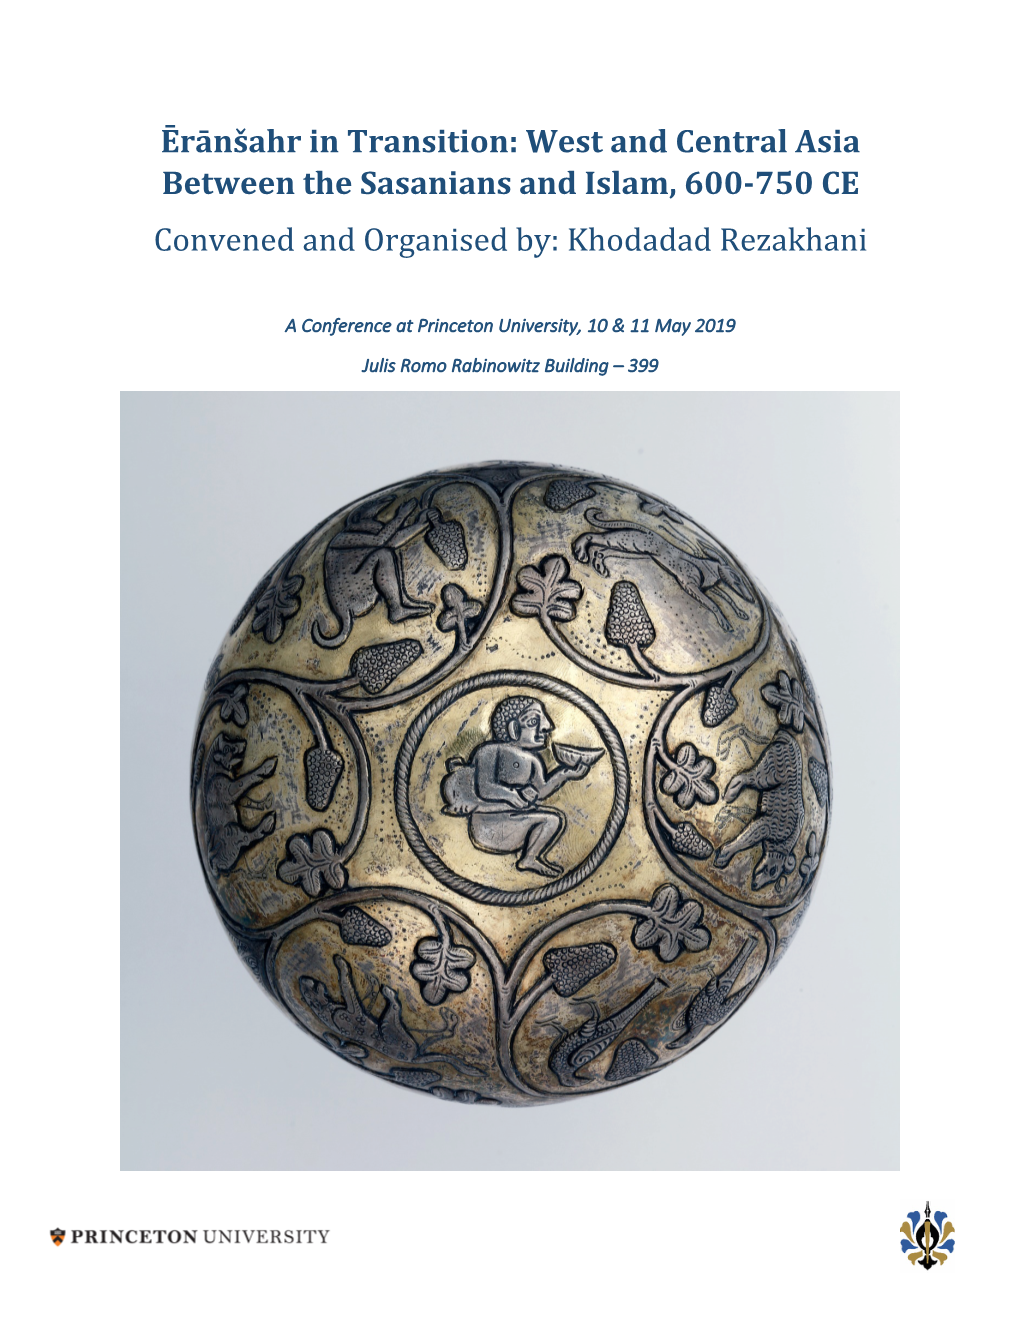 West and Central Asia Between the Sasanians and Islam, 600-750 CE Convened and Organised By: Khodadad Rezakhani